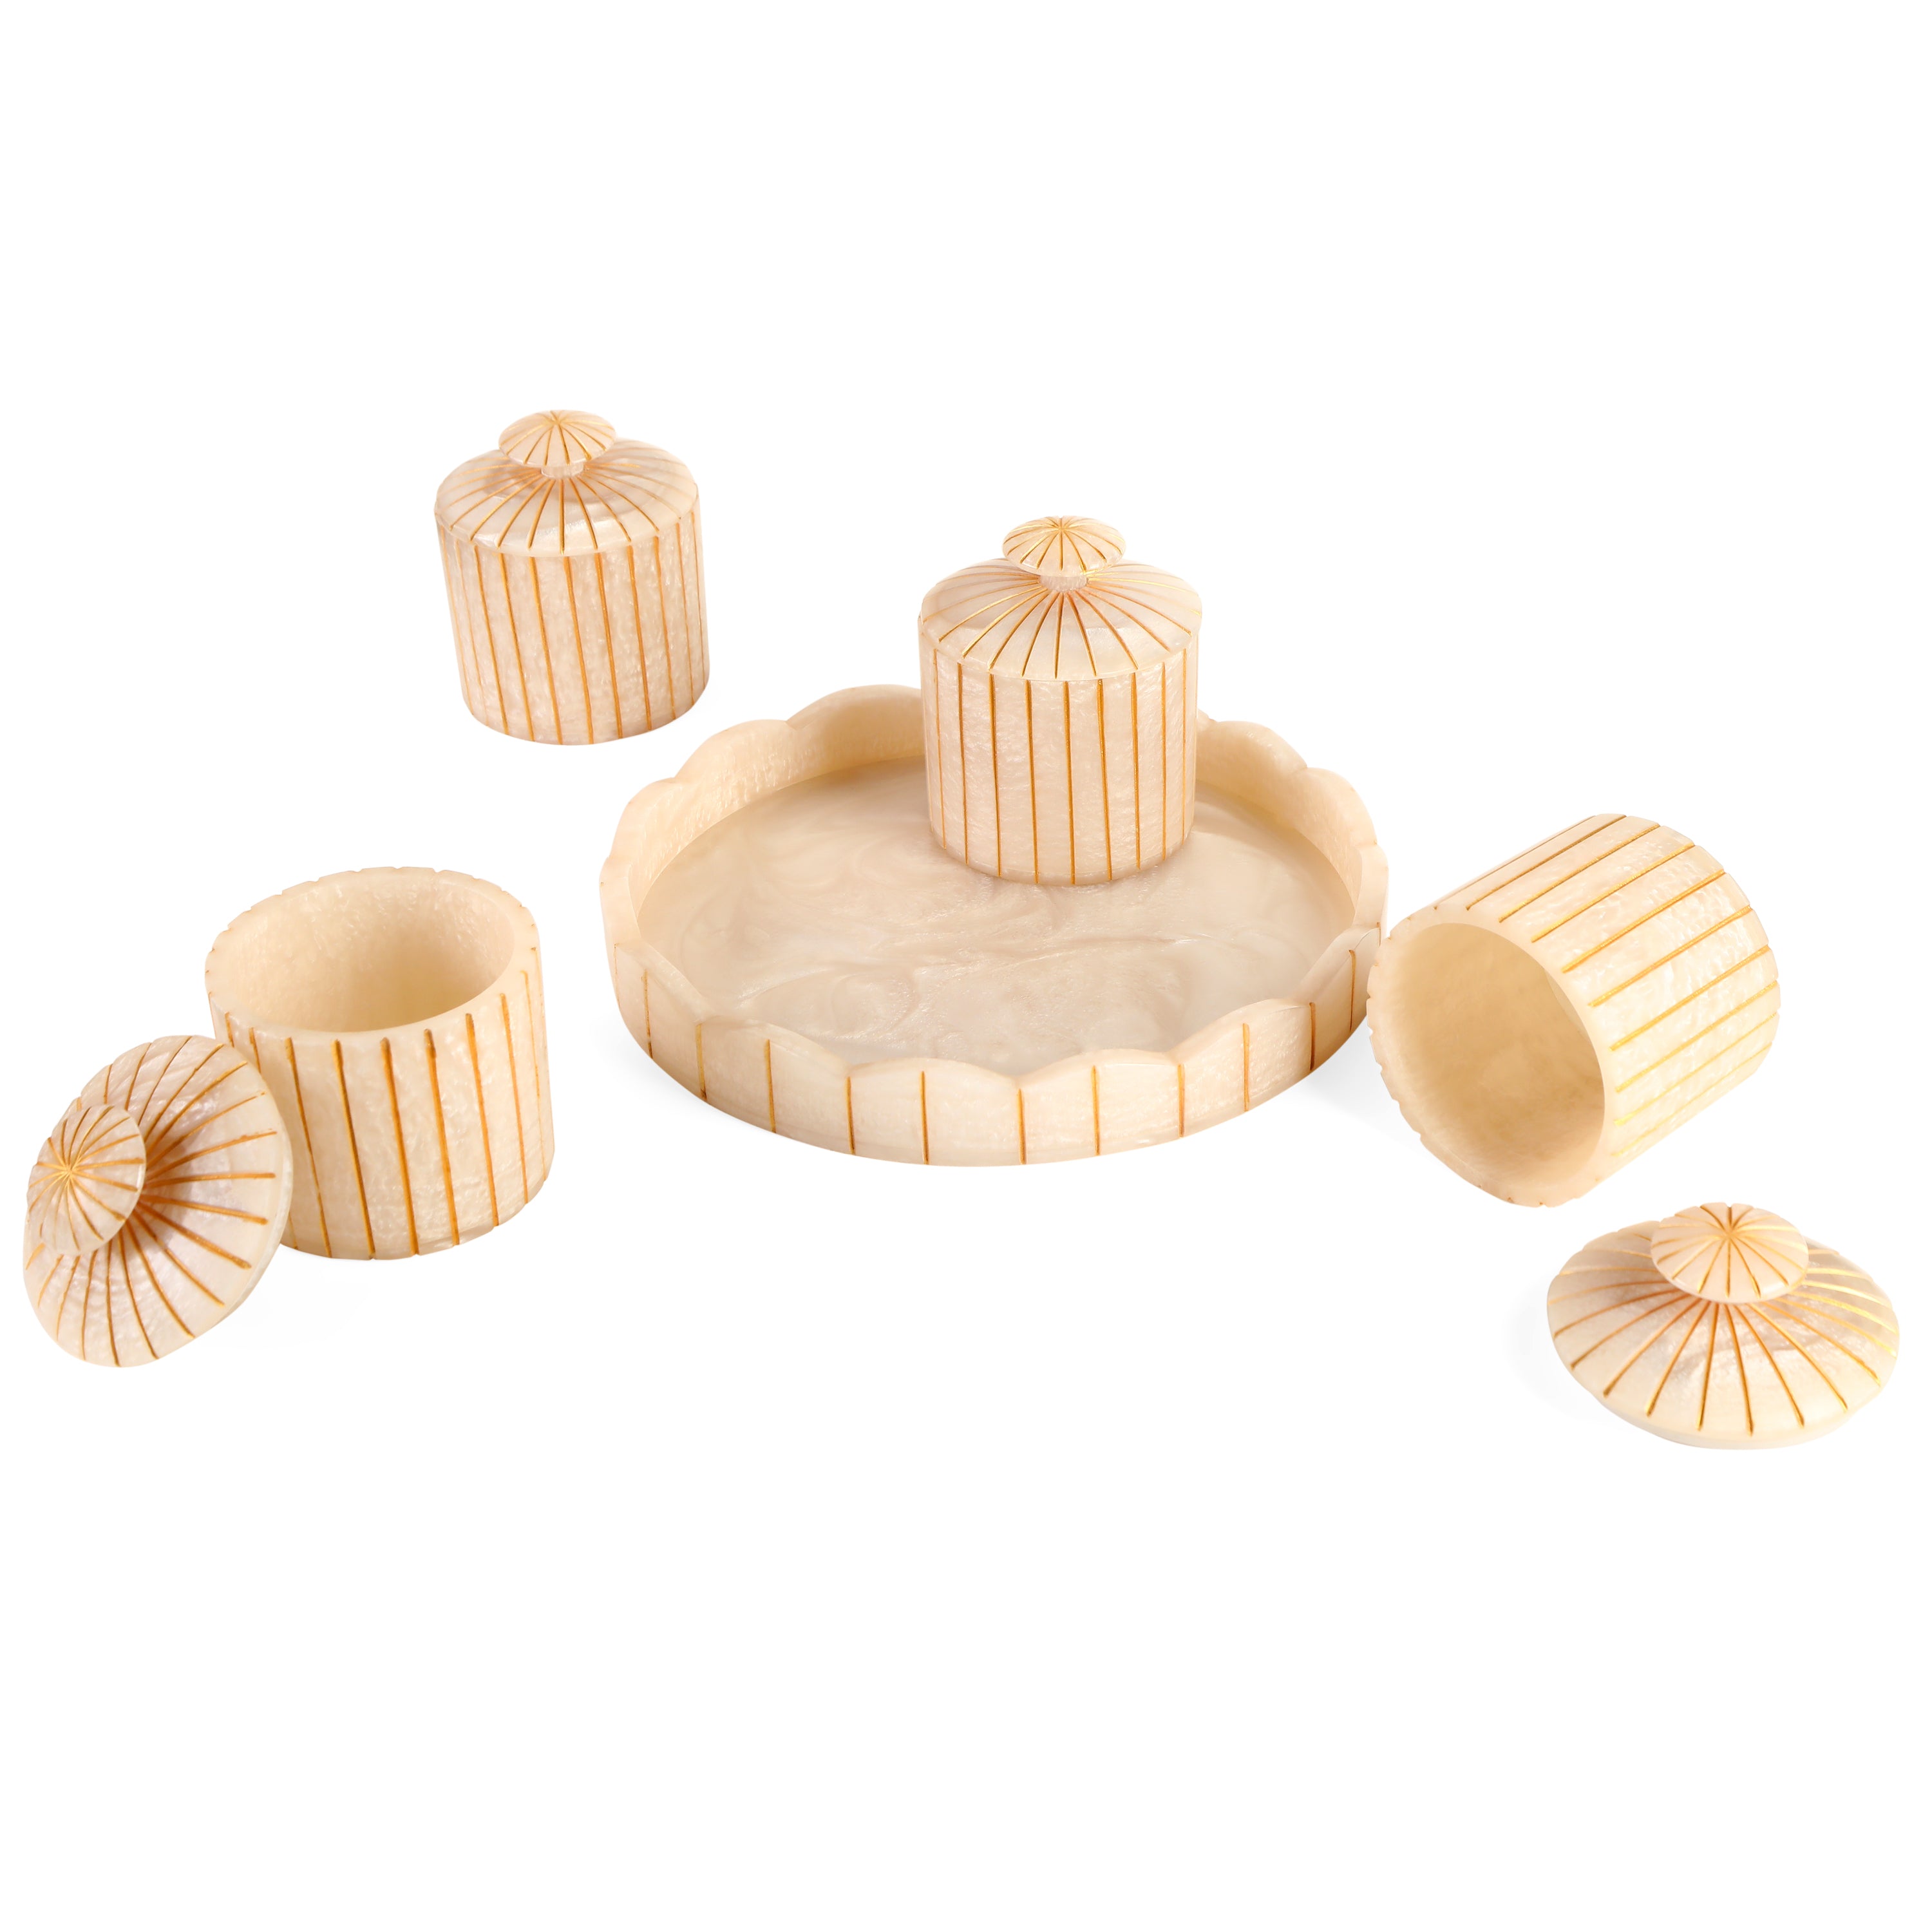 Resin Jar Set With Tray - Set of 4 (Ivory) 2- The Home Co.